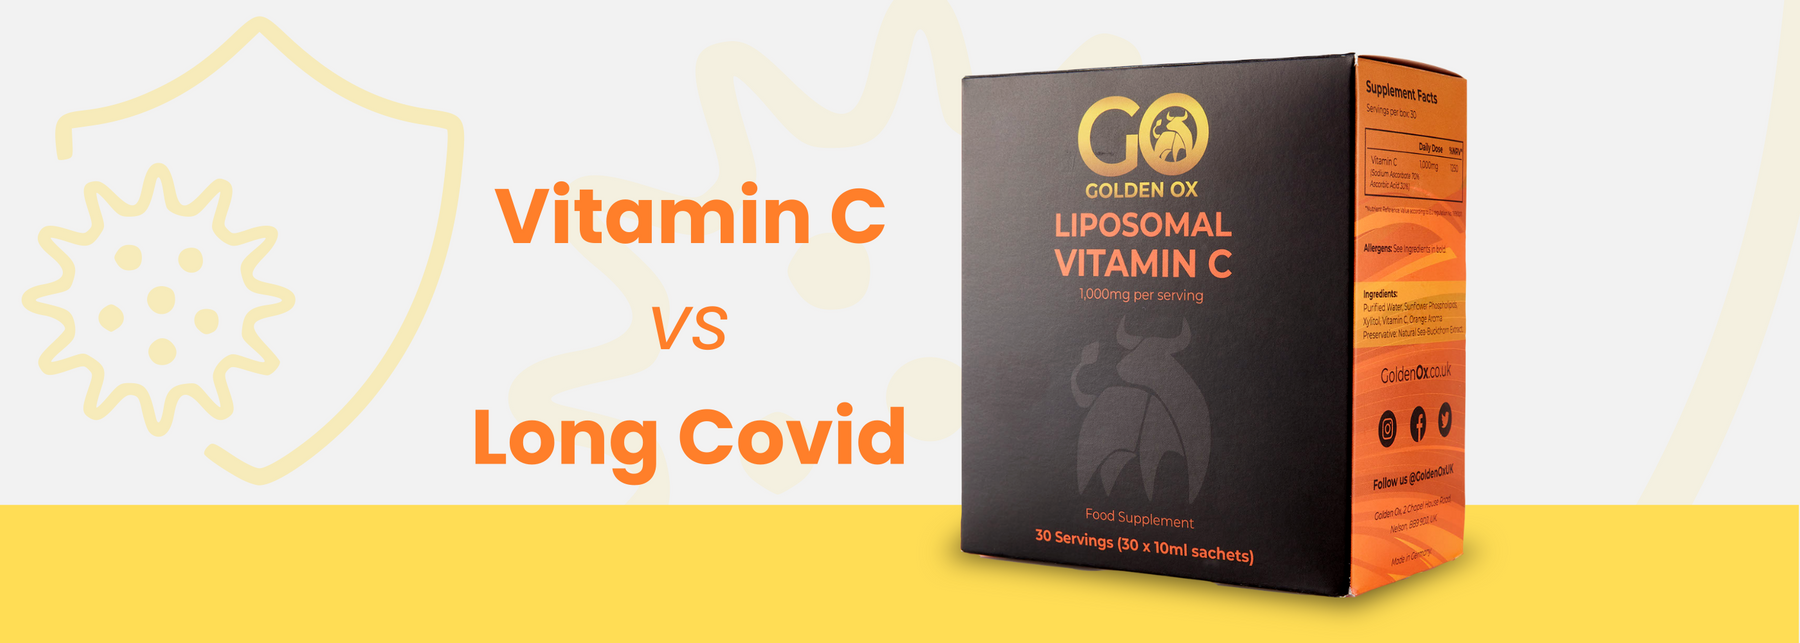 Can Vitamin C help with the long-term effects of Covid?